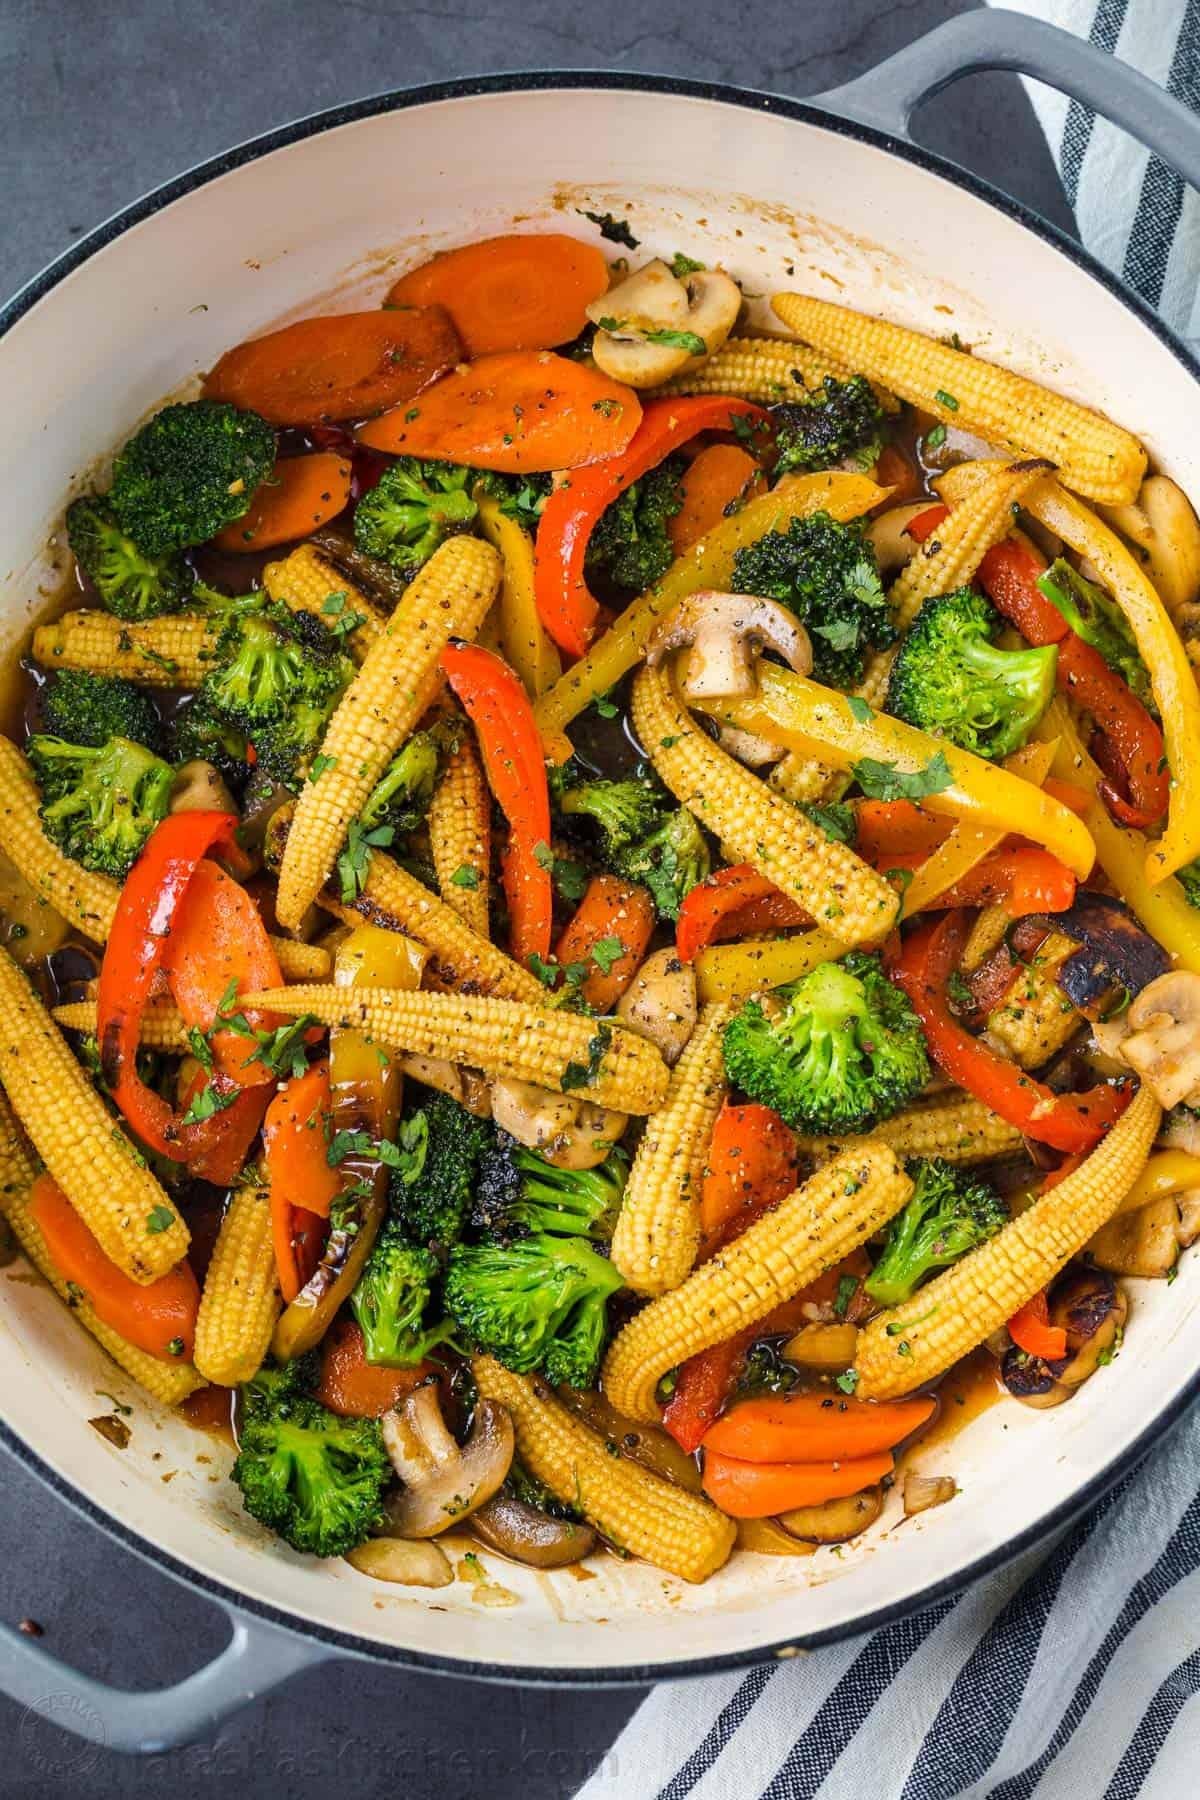 5 Minute Delicious Veggie Stir Fry Recipe for Busy Weeknights